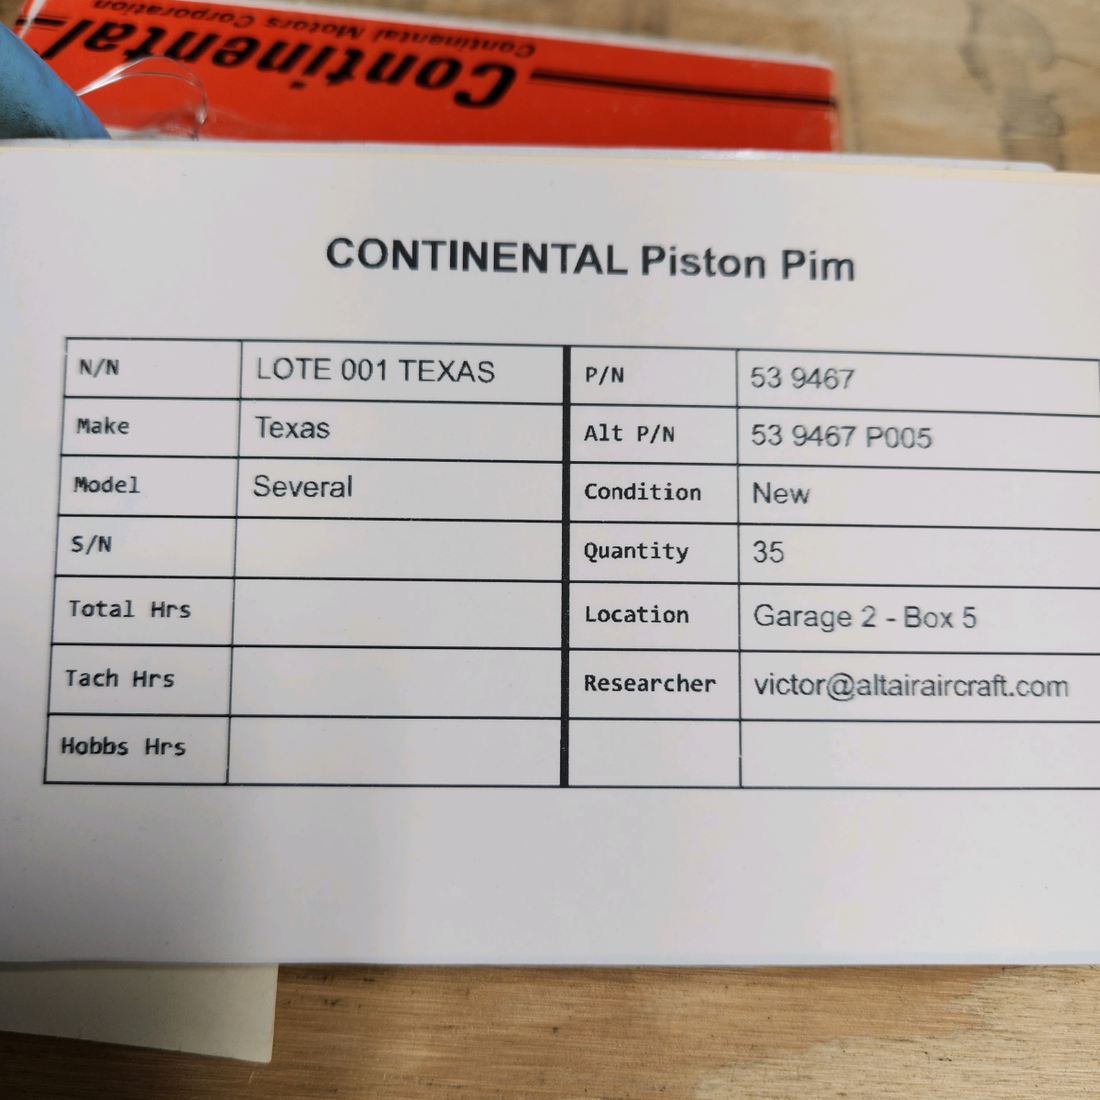 Used aircraft parts for sale, 53 9467 Texas Several CONTINENTAL PISTON PIN PRICE PER EACH.